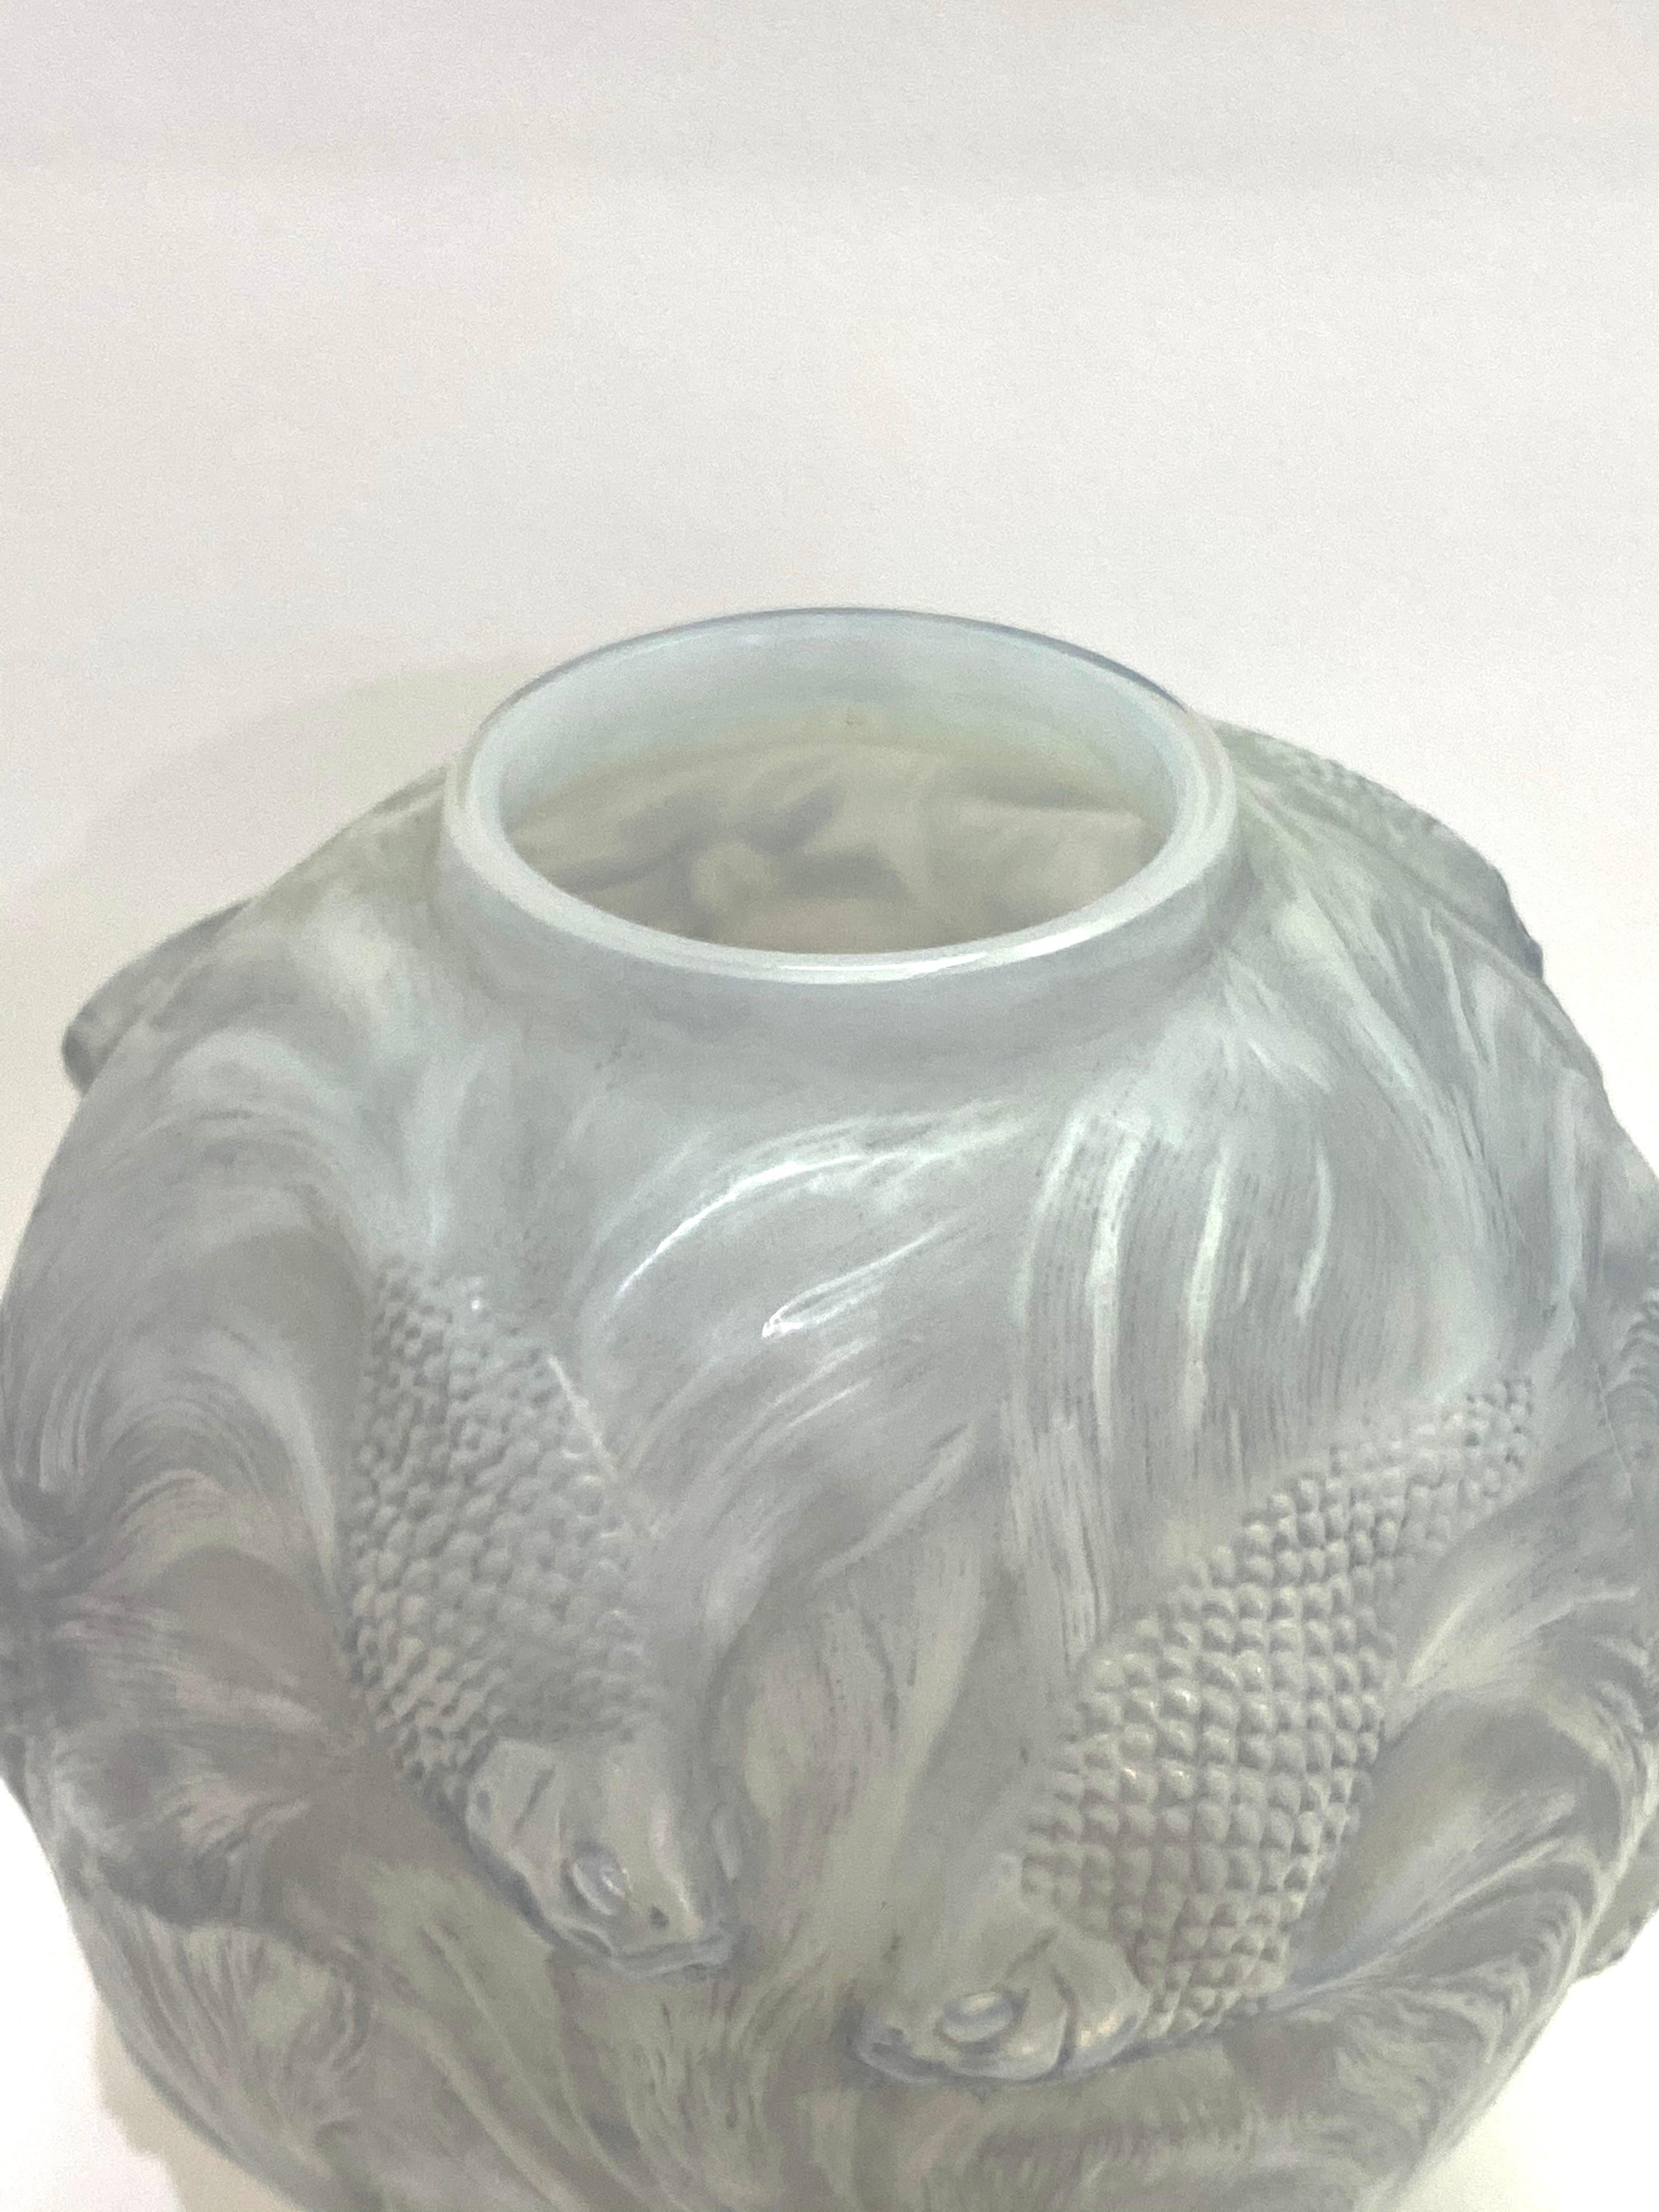 Art Deco 1924 Rene Lalique Formose Vase in Double Cased Opalescent Glass with Grey Stain